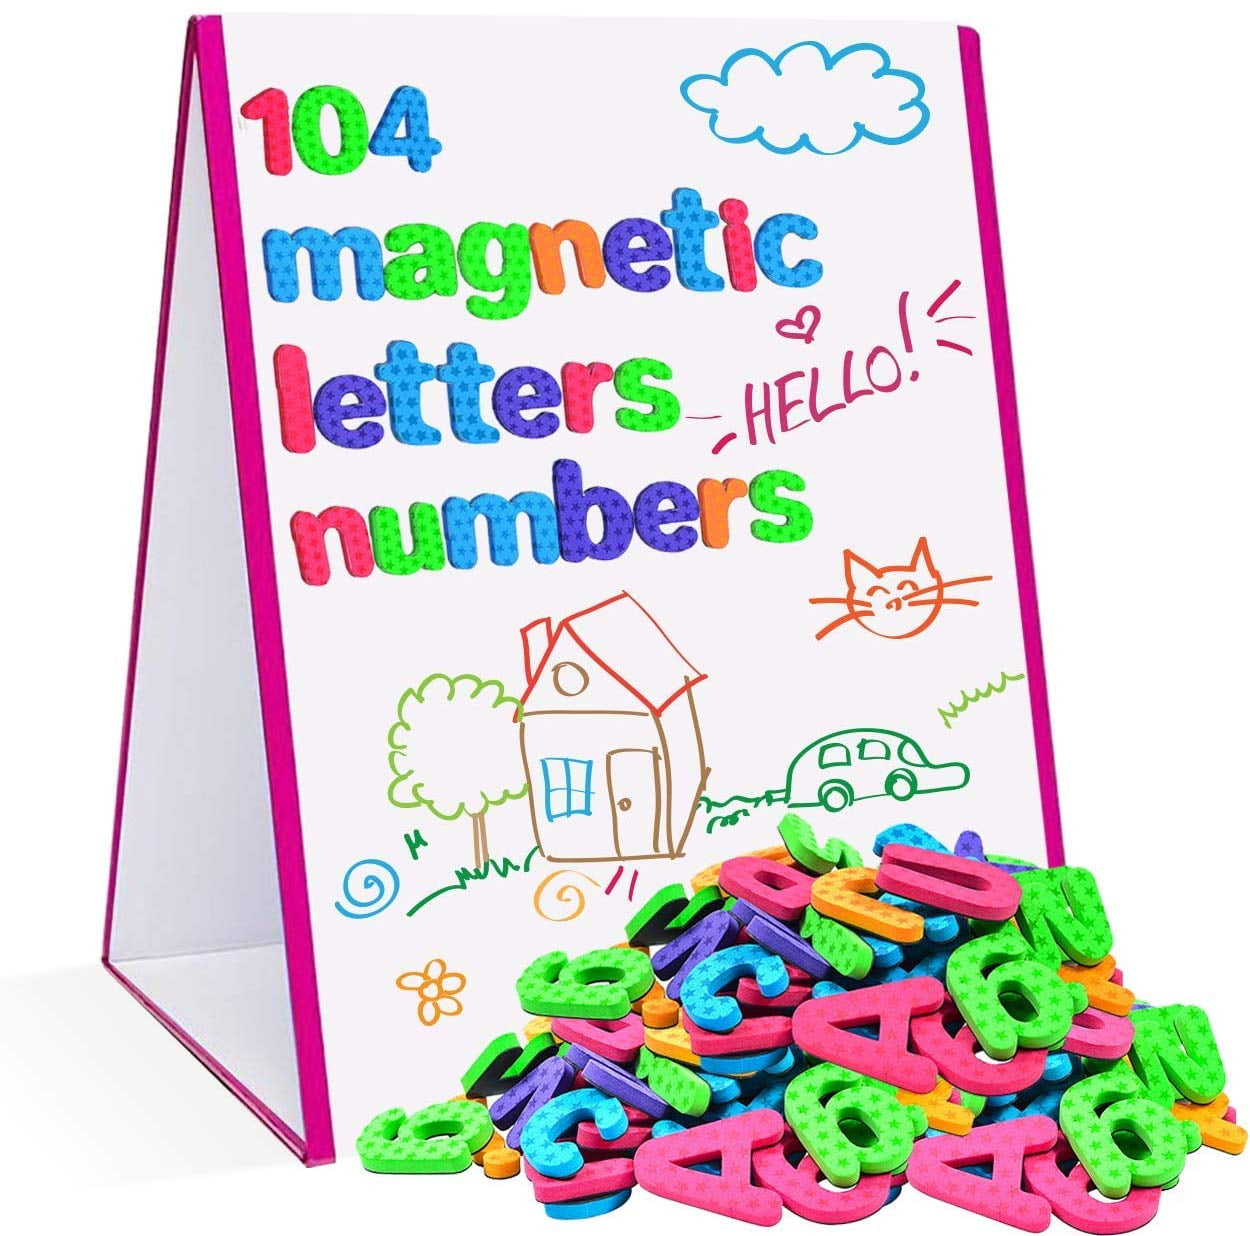 Joyooss Kids Wooden Easel with Extra Letters and Numbers Magnets, Adju